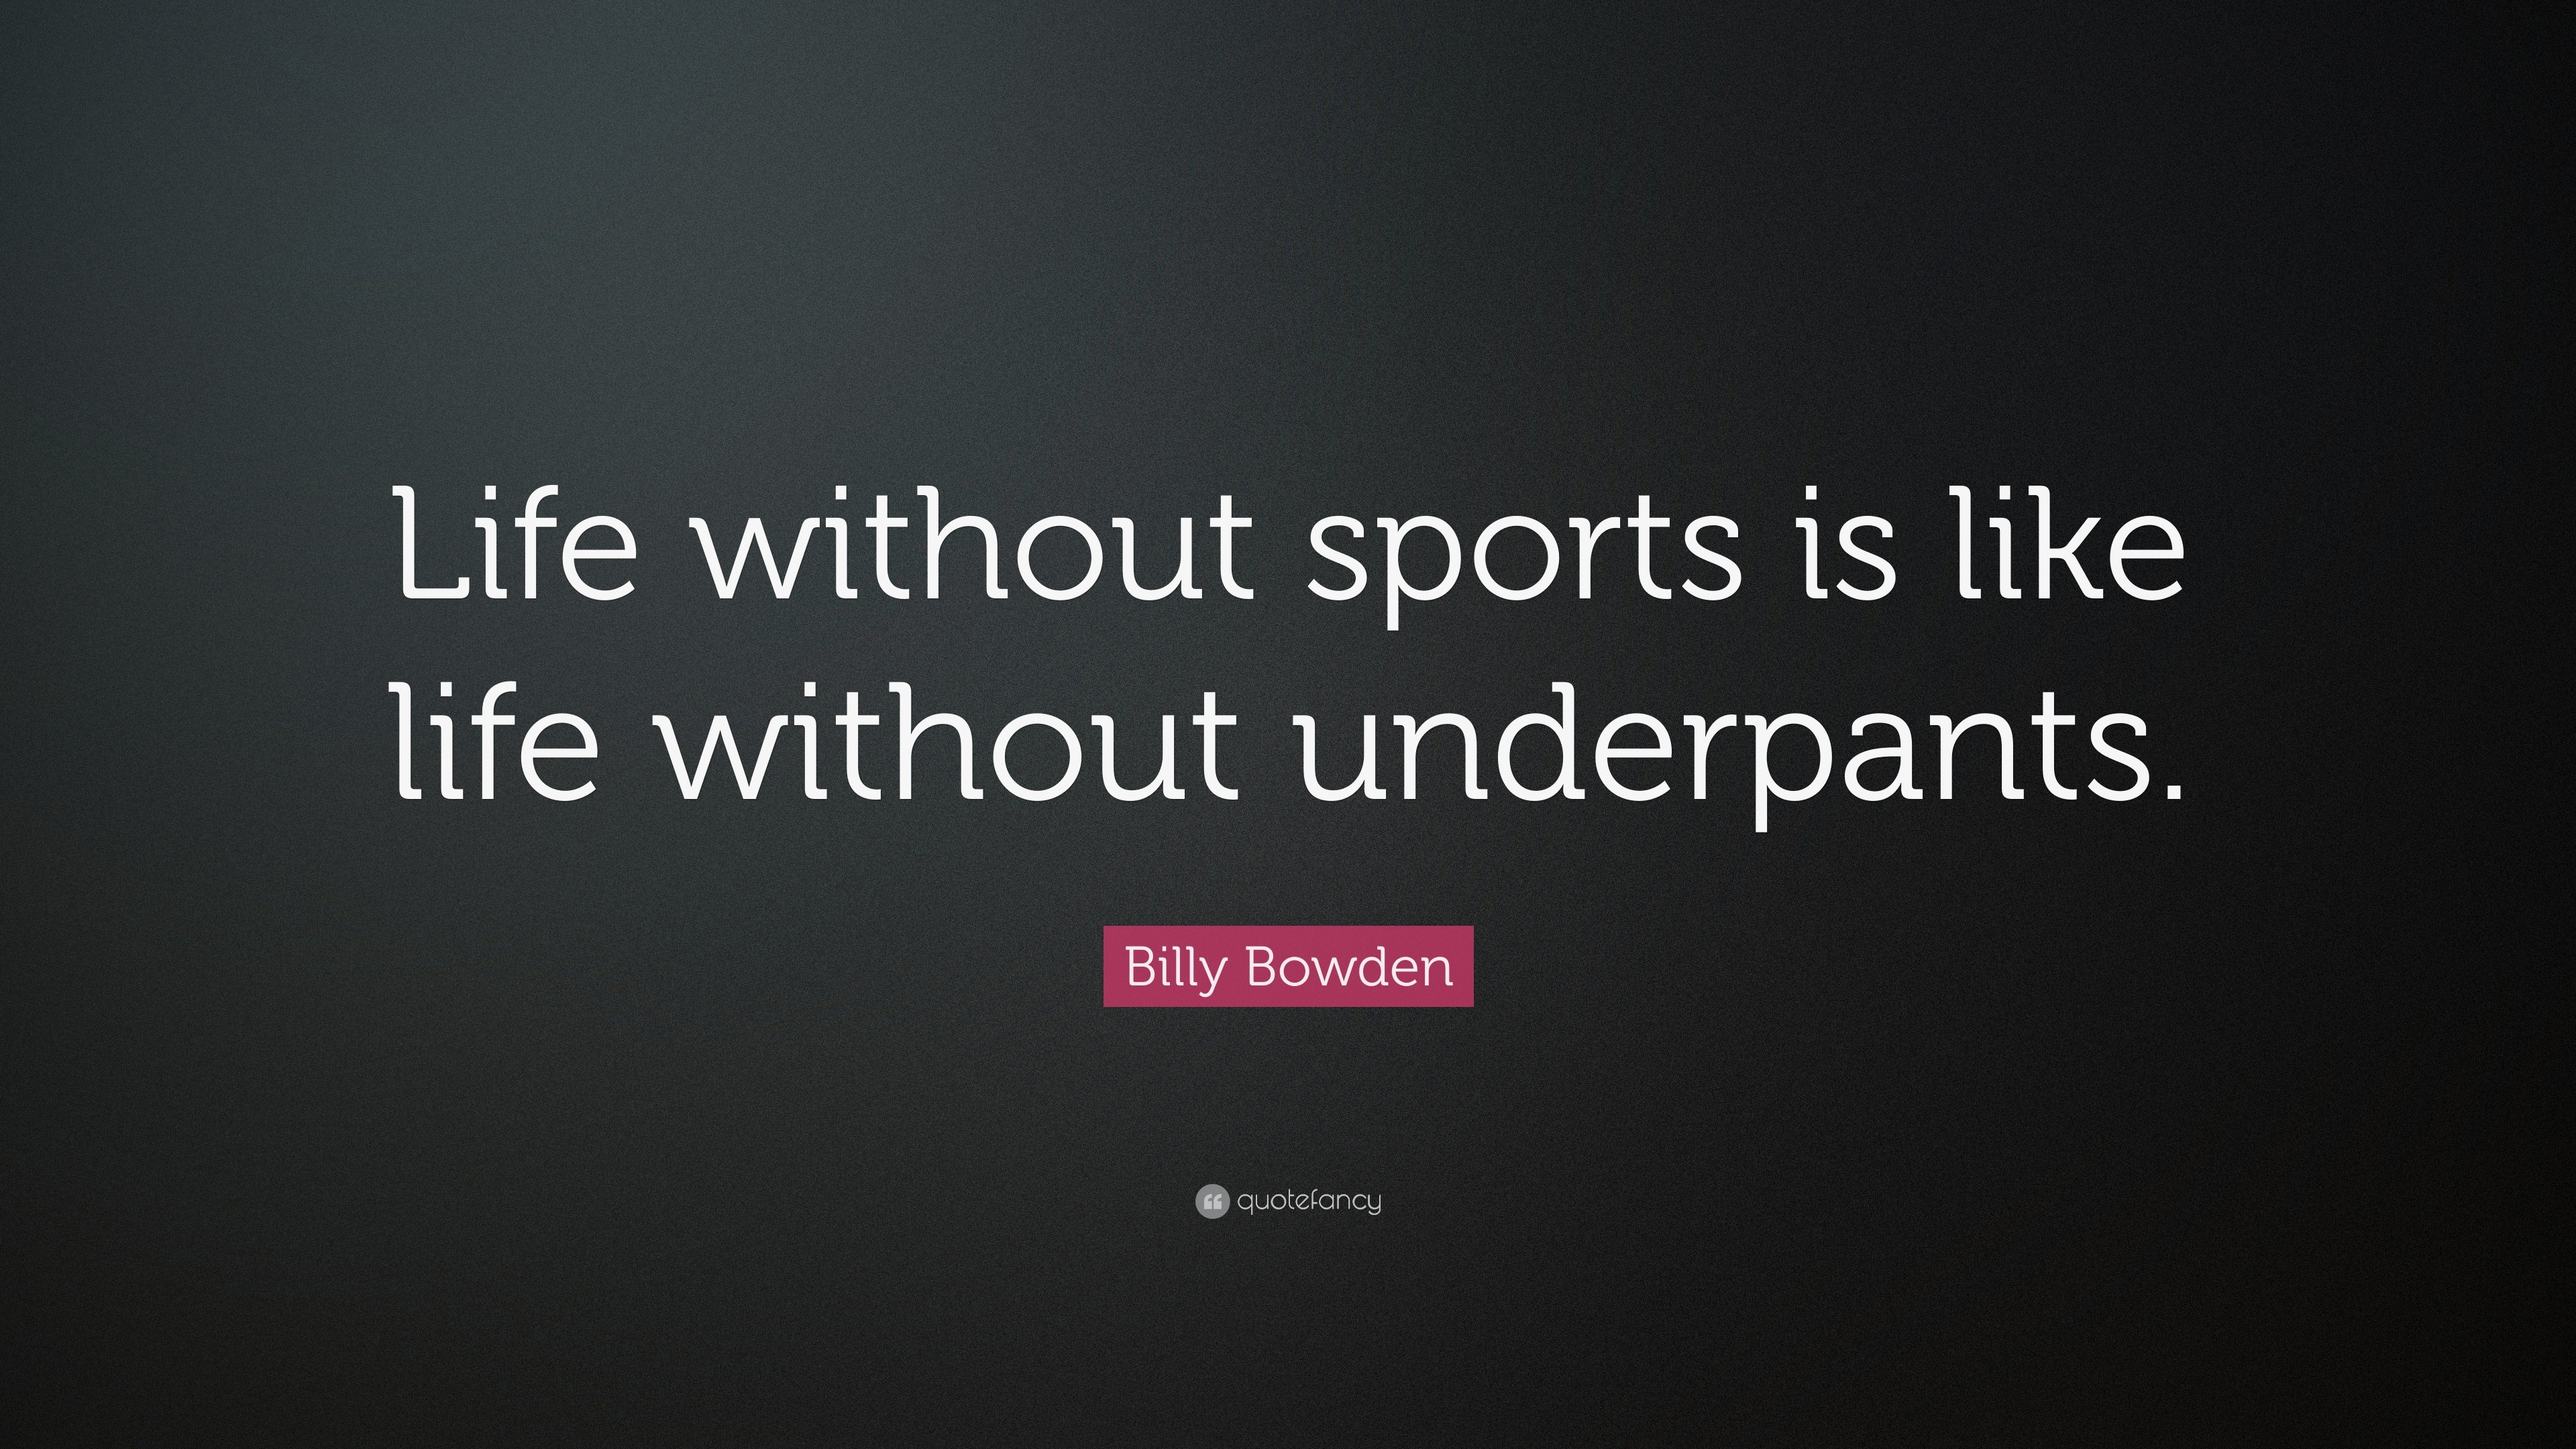 Billy Bowden Quote “Life without sports is like life without underpants ”